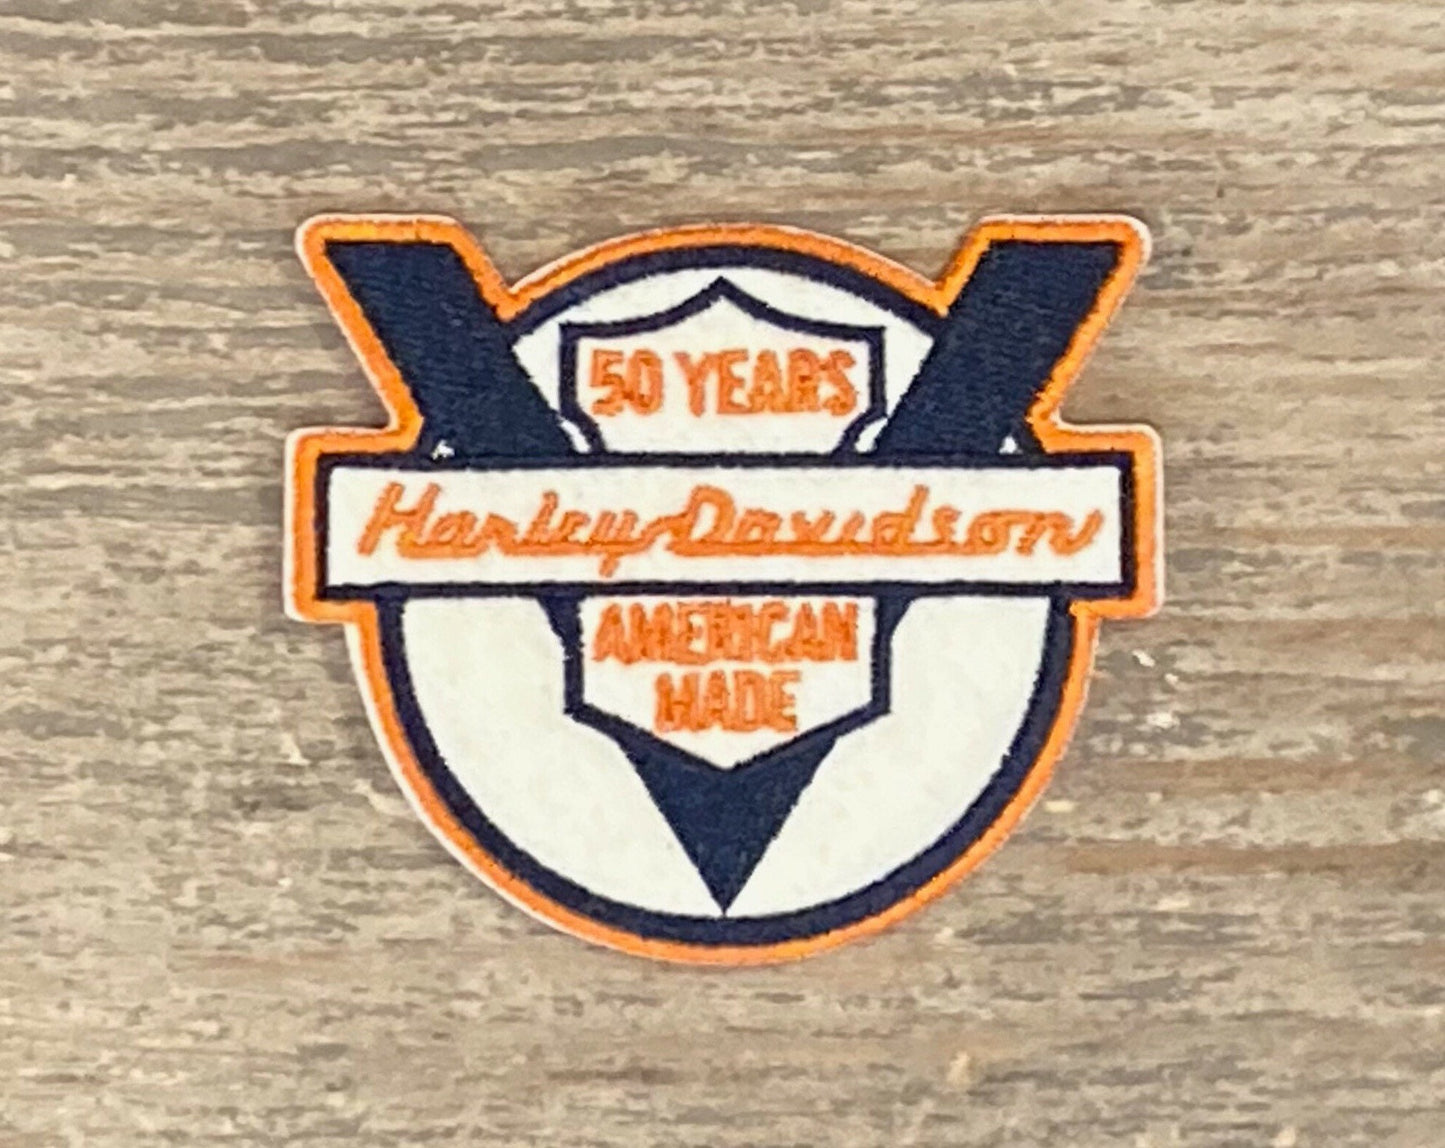 Retro Harley Davidson Motorcycle "50 Years American Made" Patch